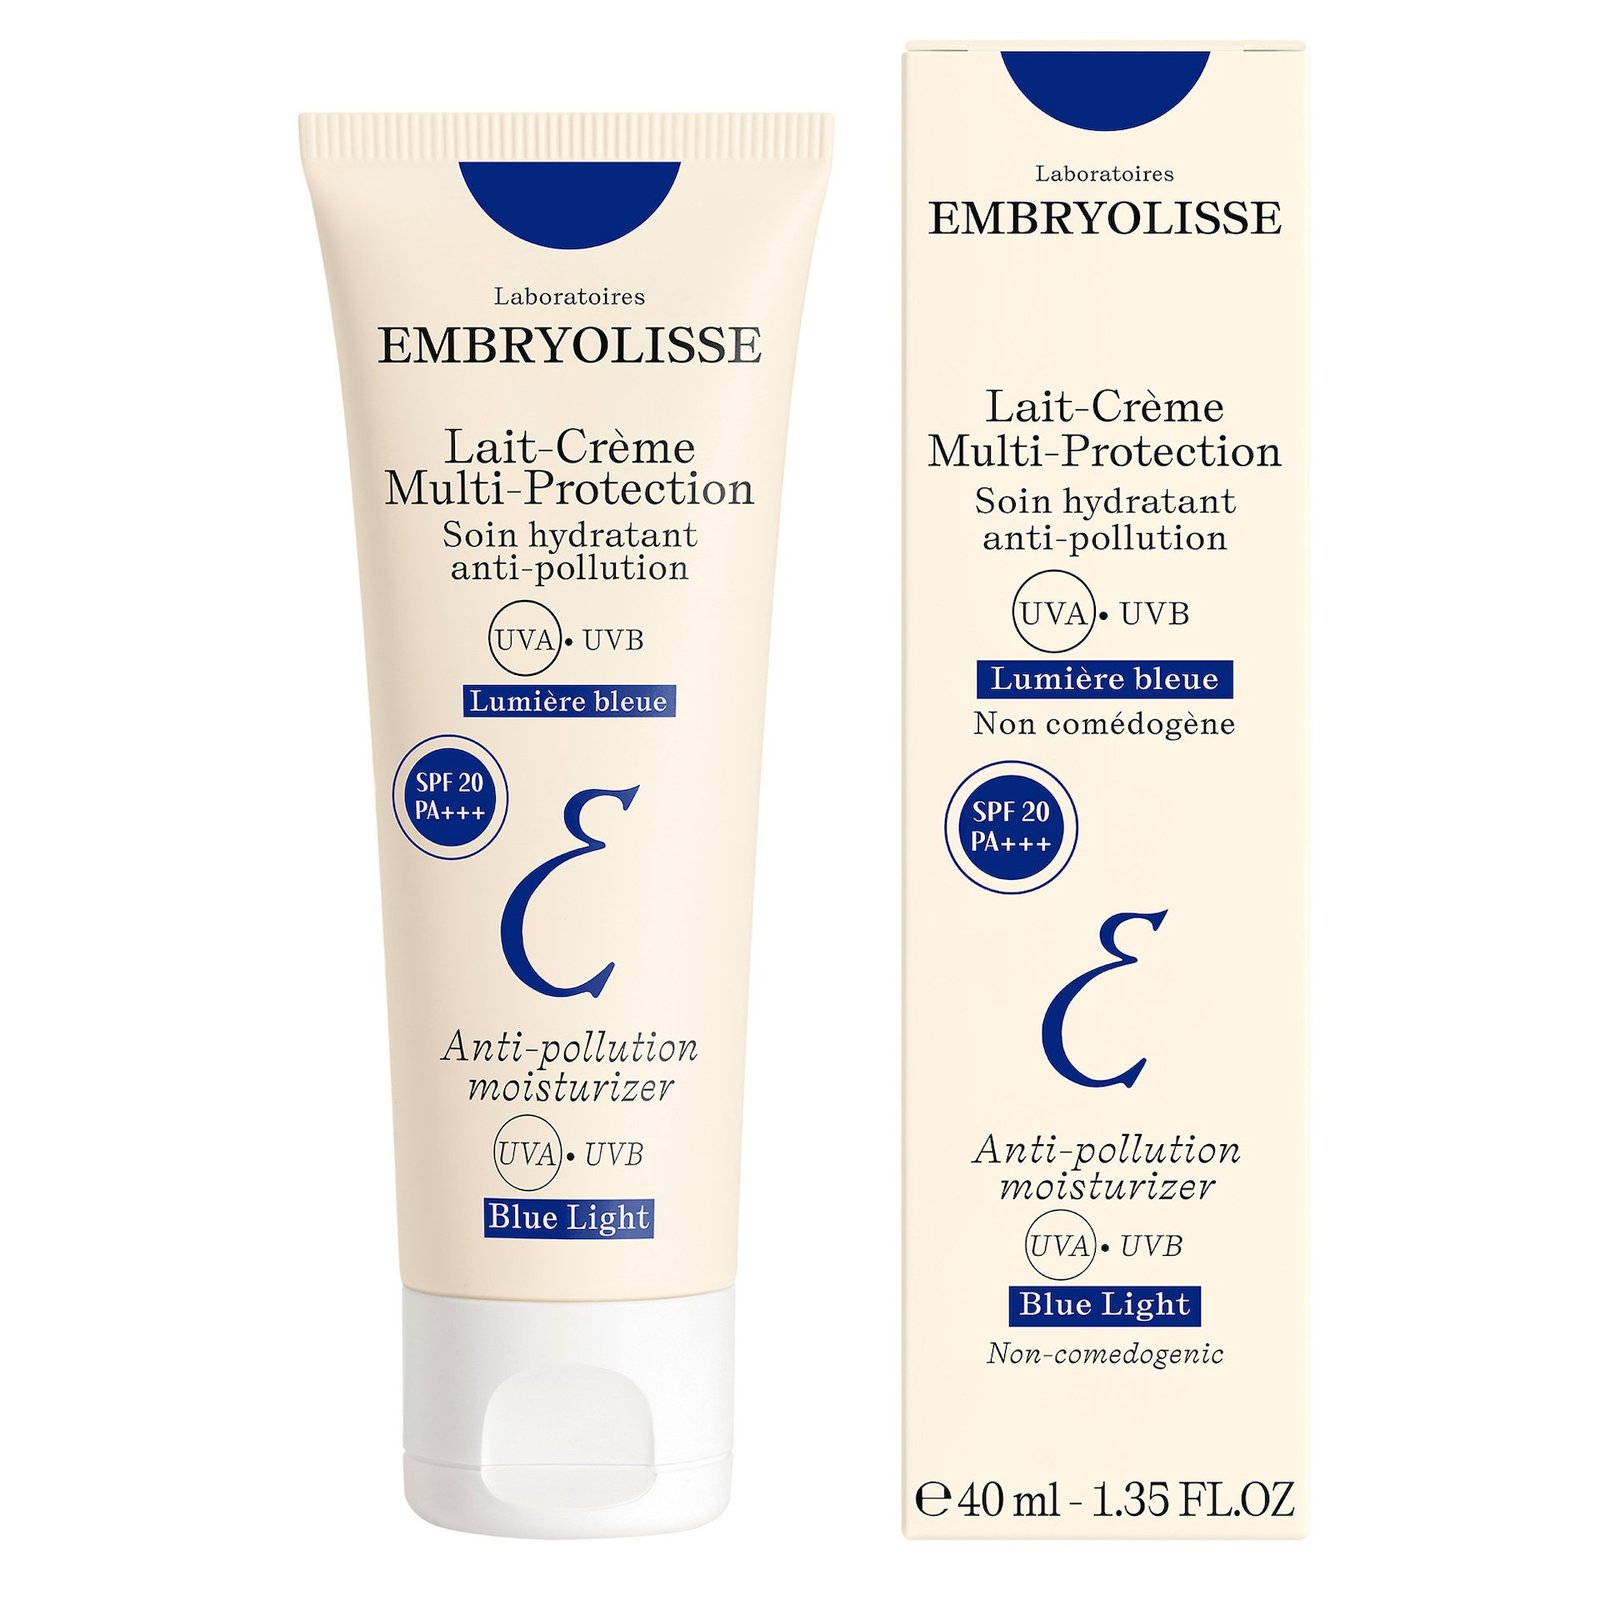 Embryolisse Lait Creme Multiprotection SPF20 40ml